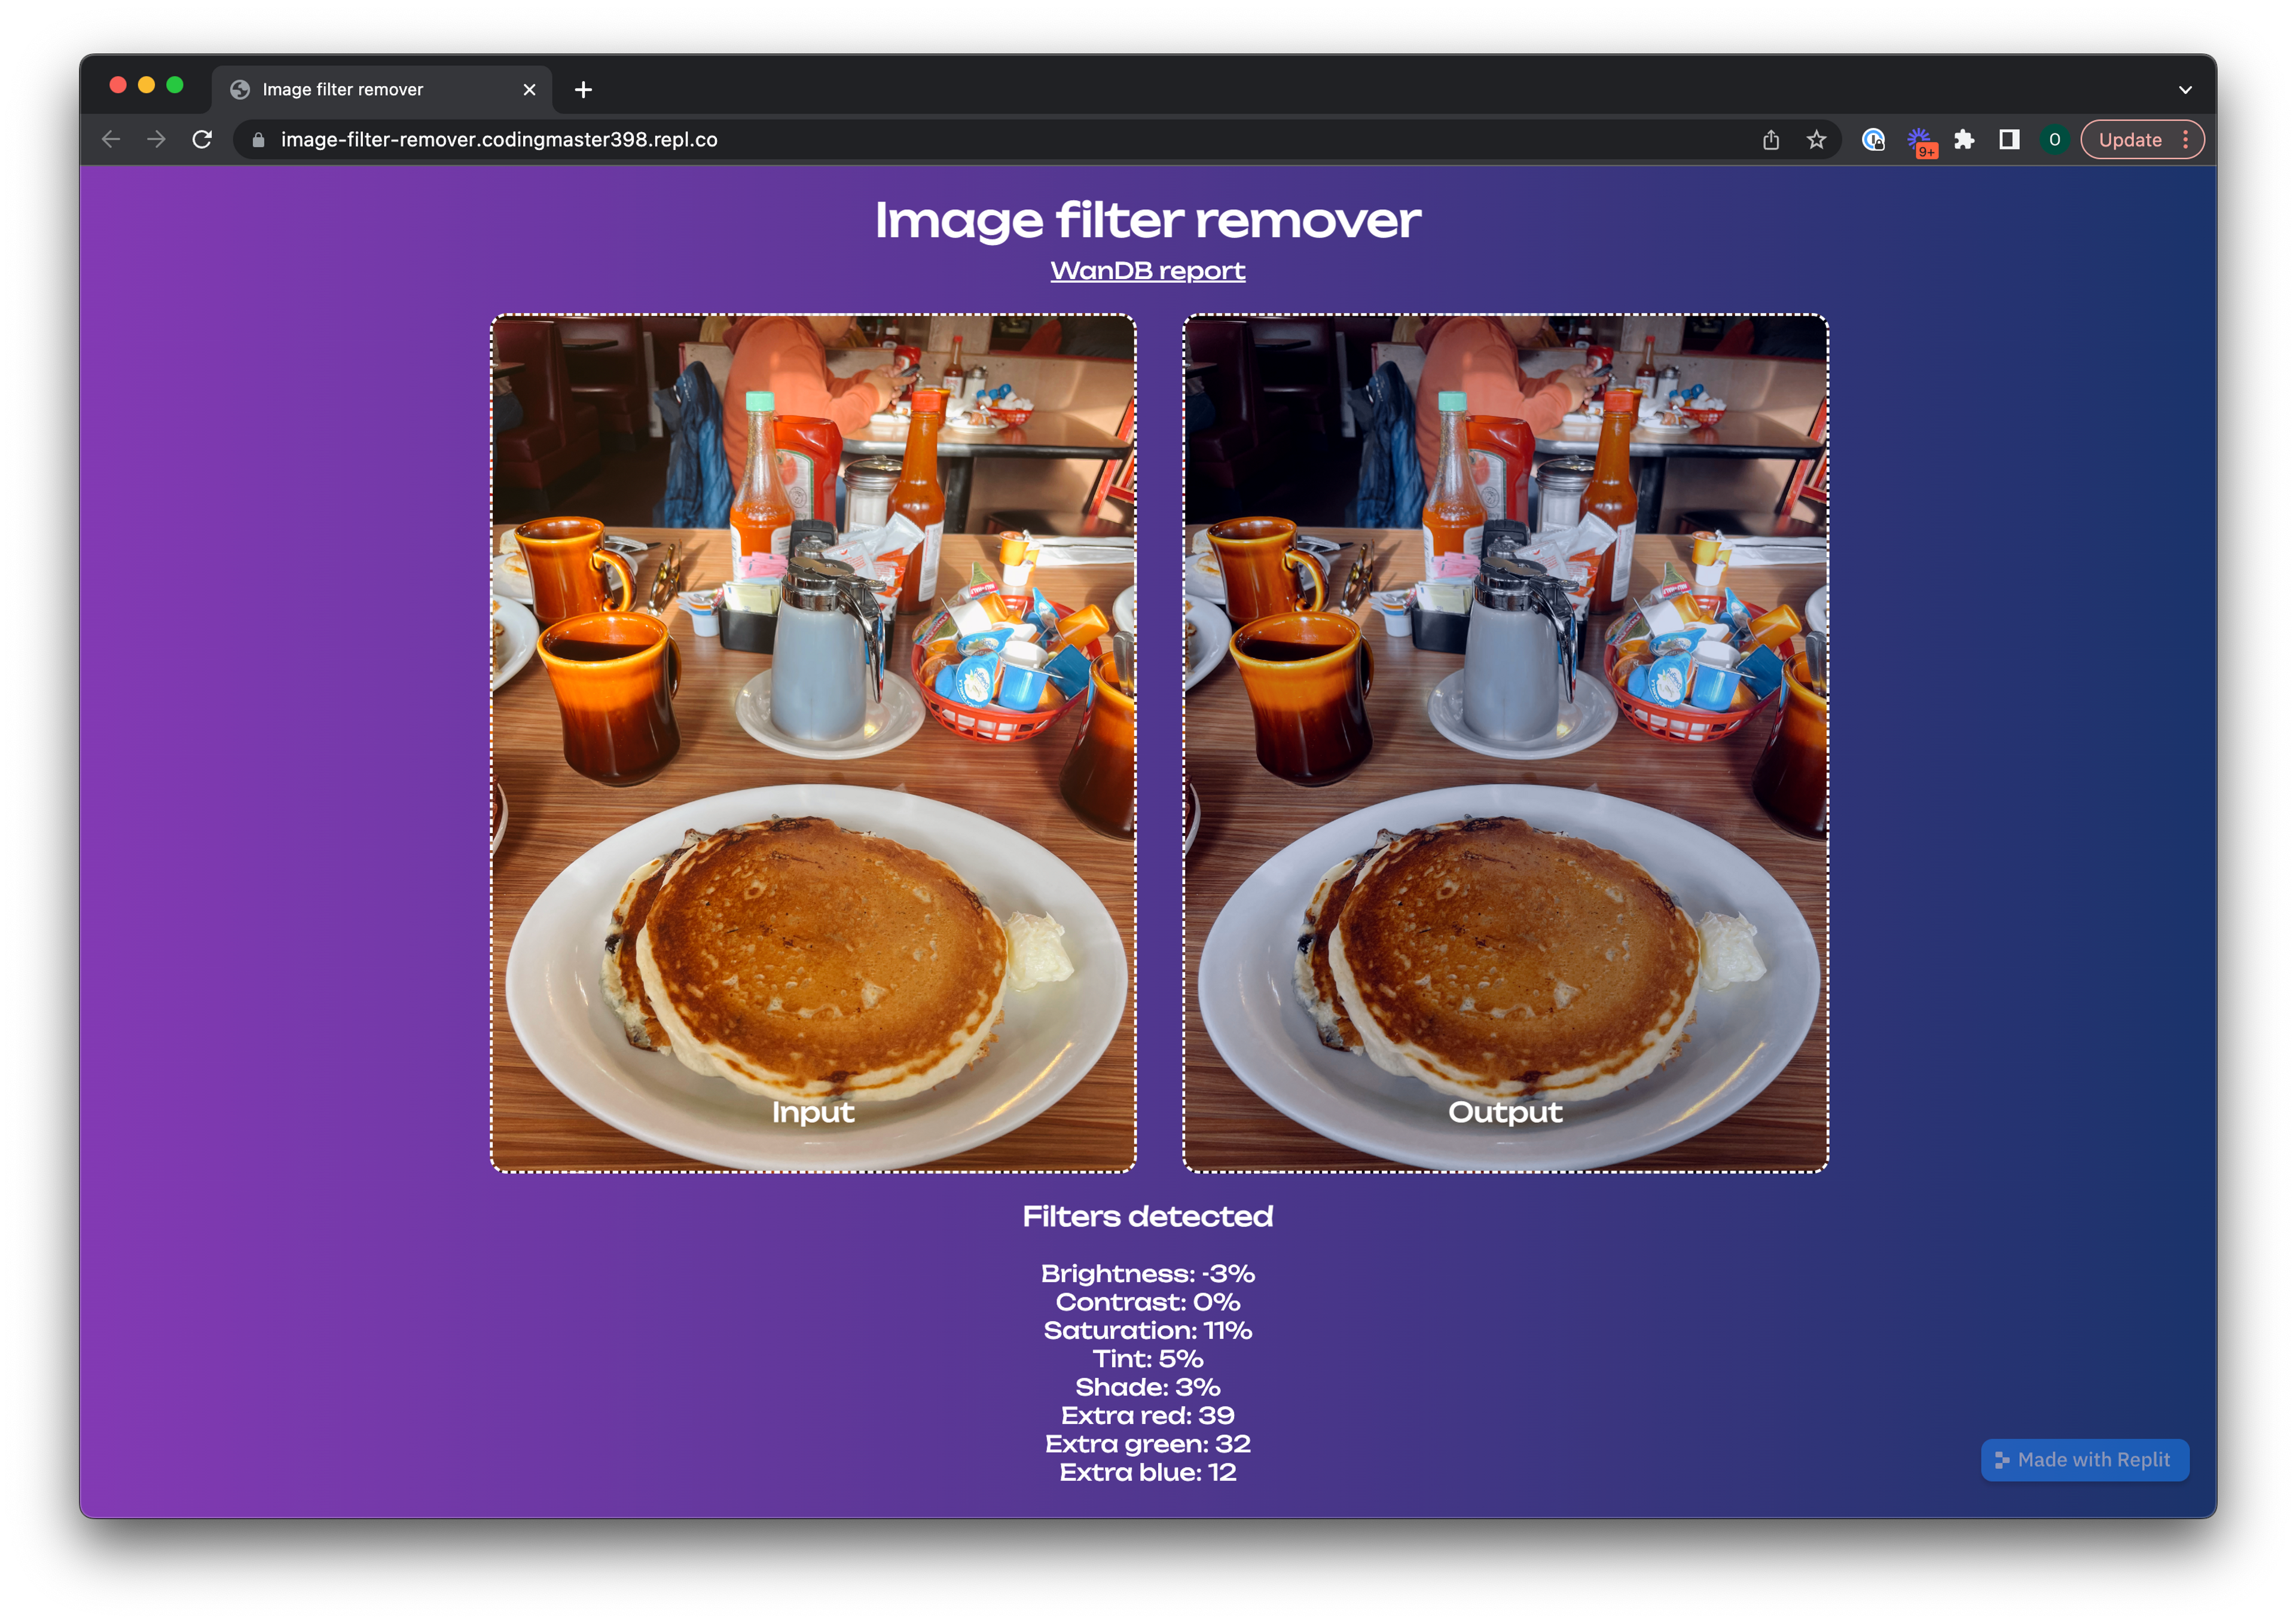 Pancakes pic filter being detected